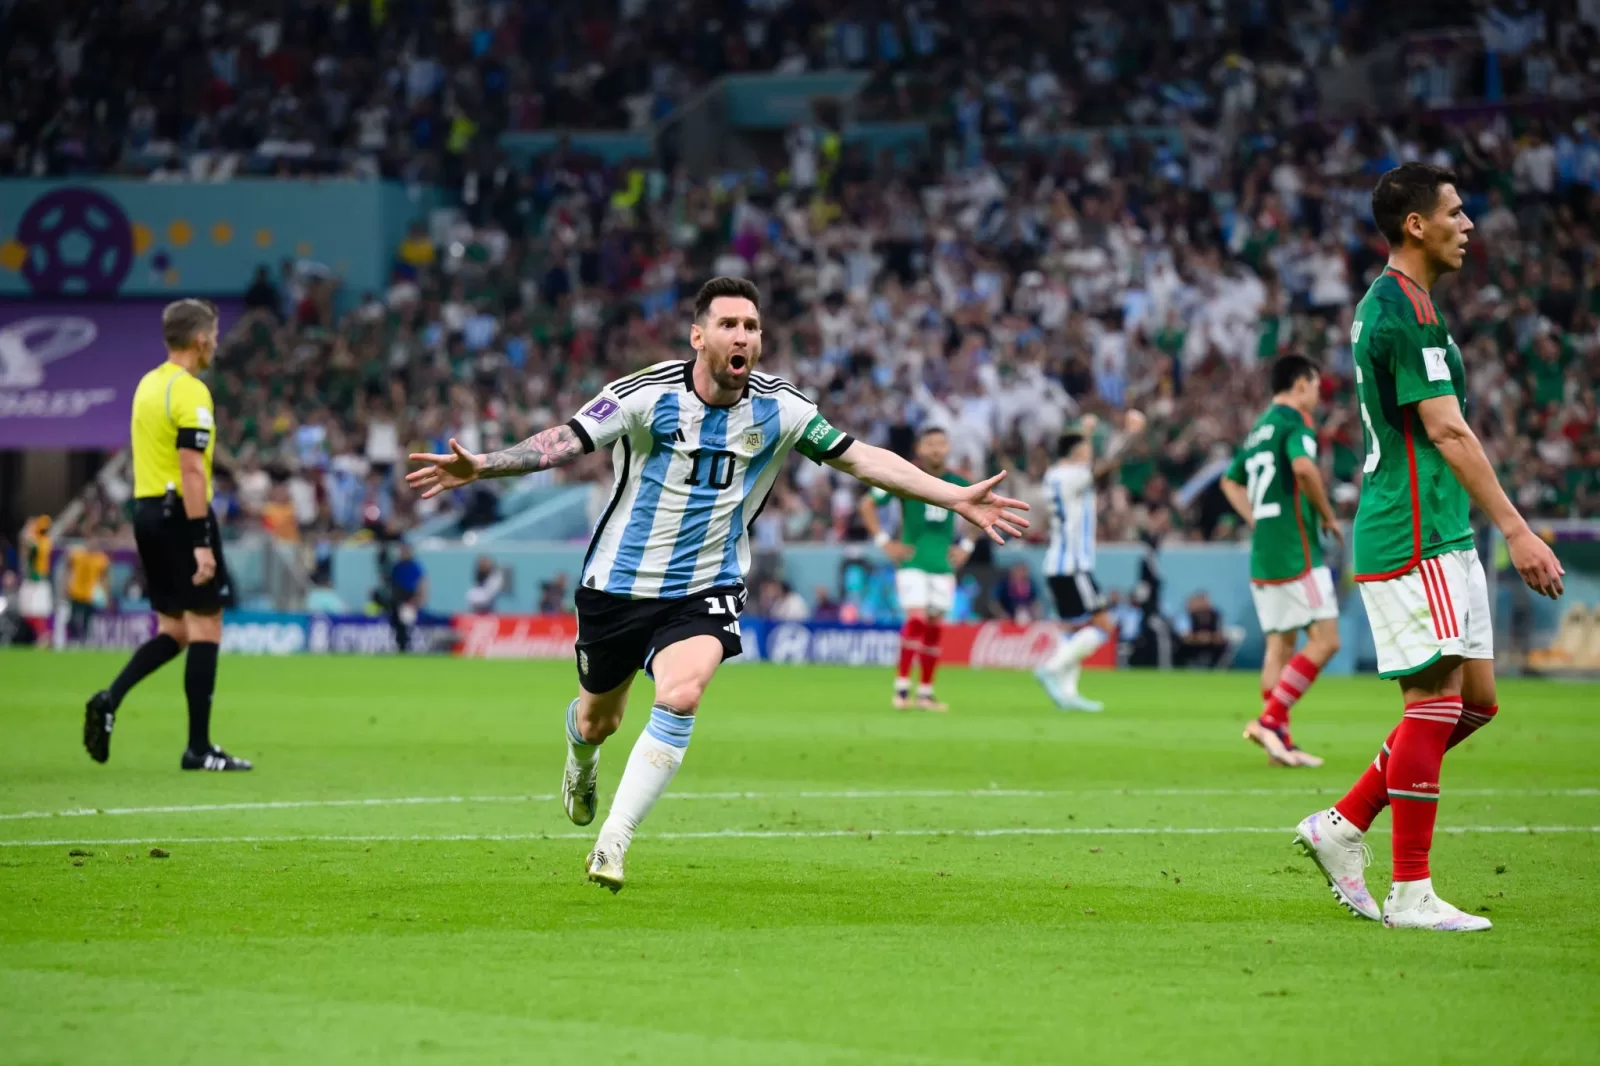 Lionel Messi stepped up to save Argentina